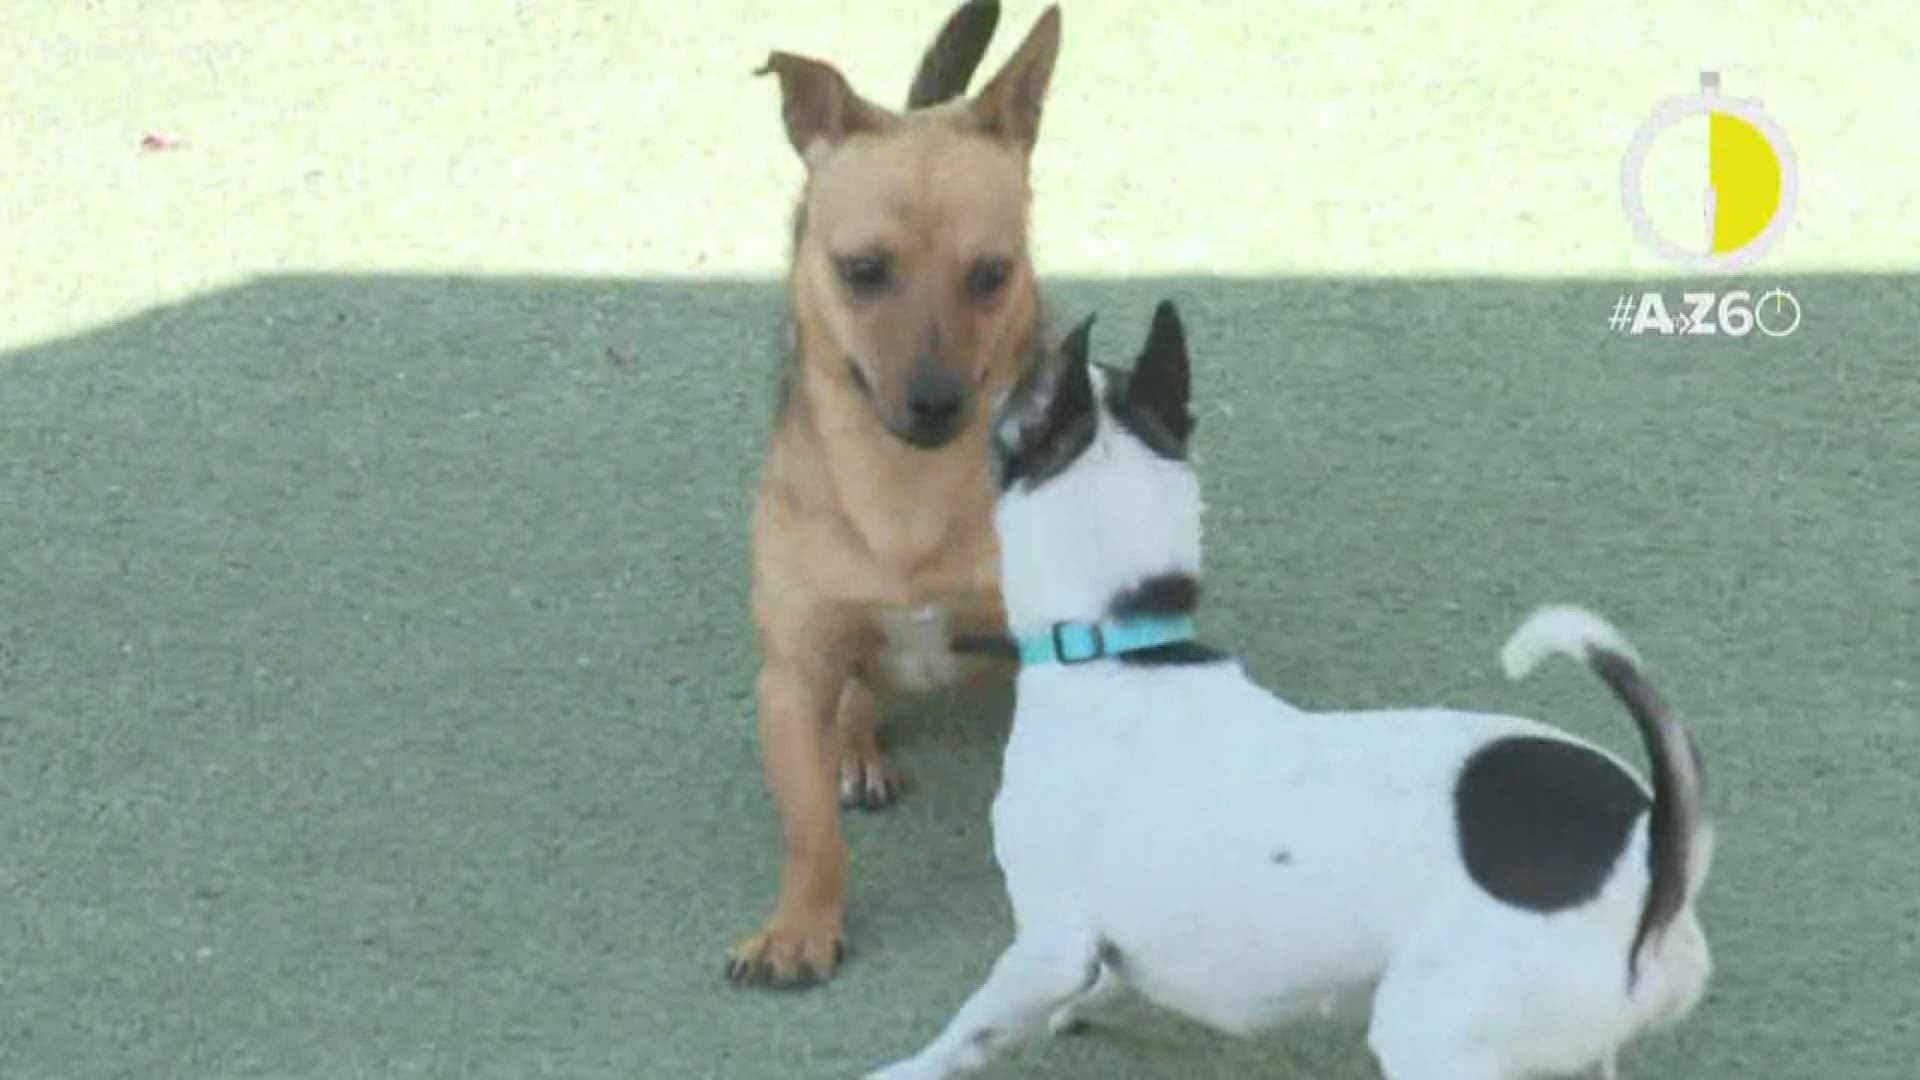 If you're looking to add a new dog or cat to your family, Foothills Animal Rescue has plenty of animals looking for a forever home. Rachel Cole has the story.